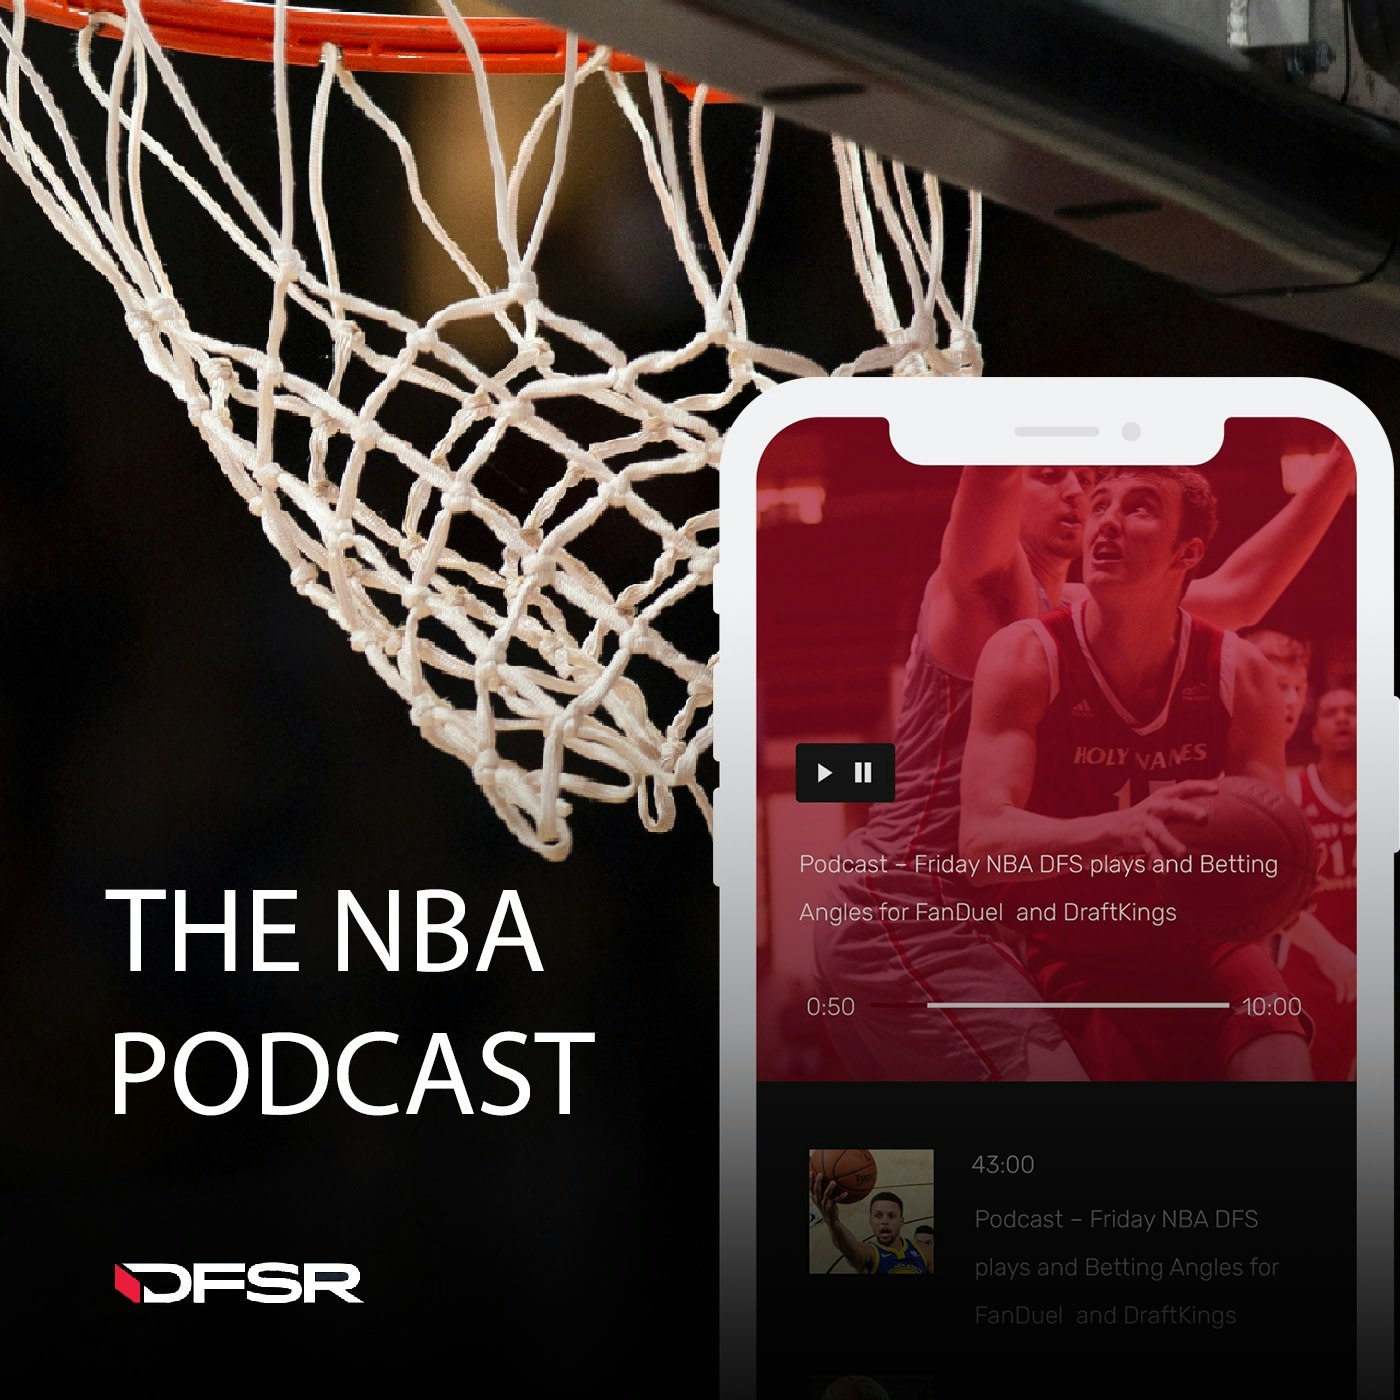 DFS NBA Podcast for FanDuel and DraftKings - 11/9/18